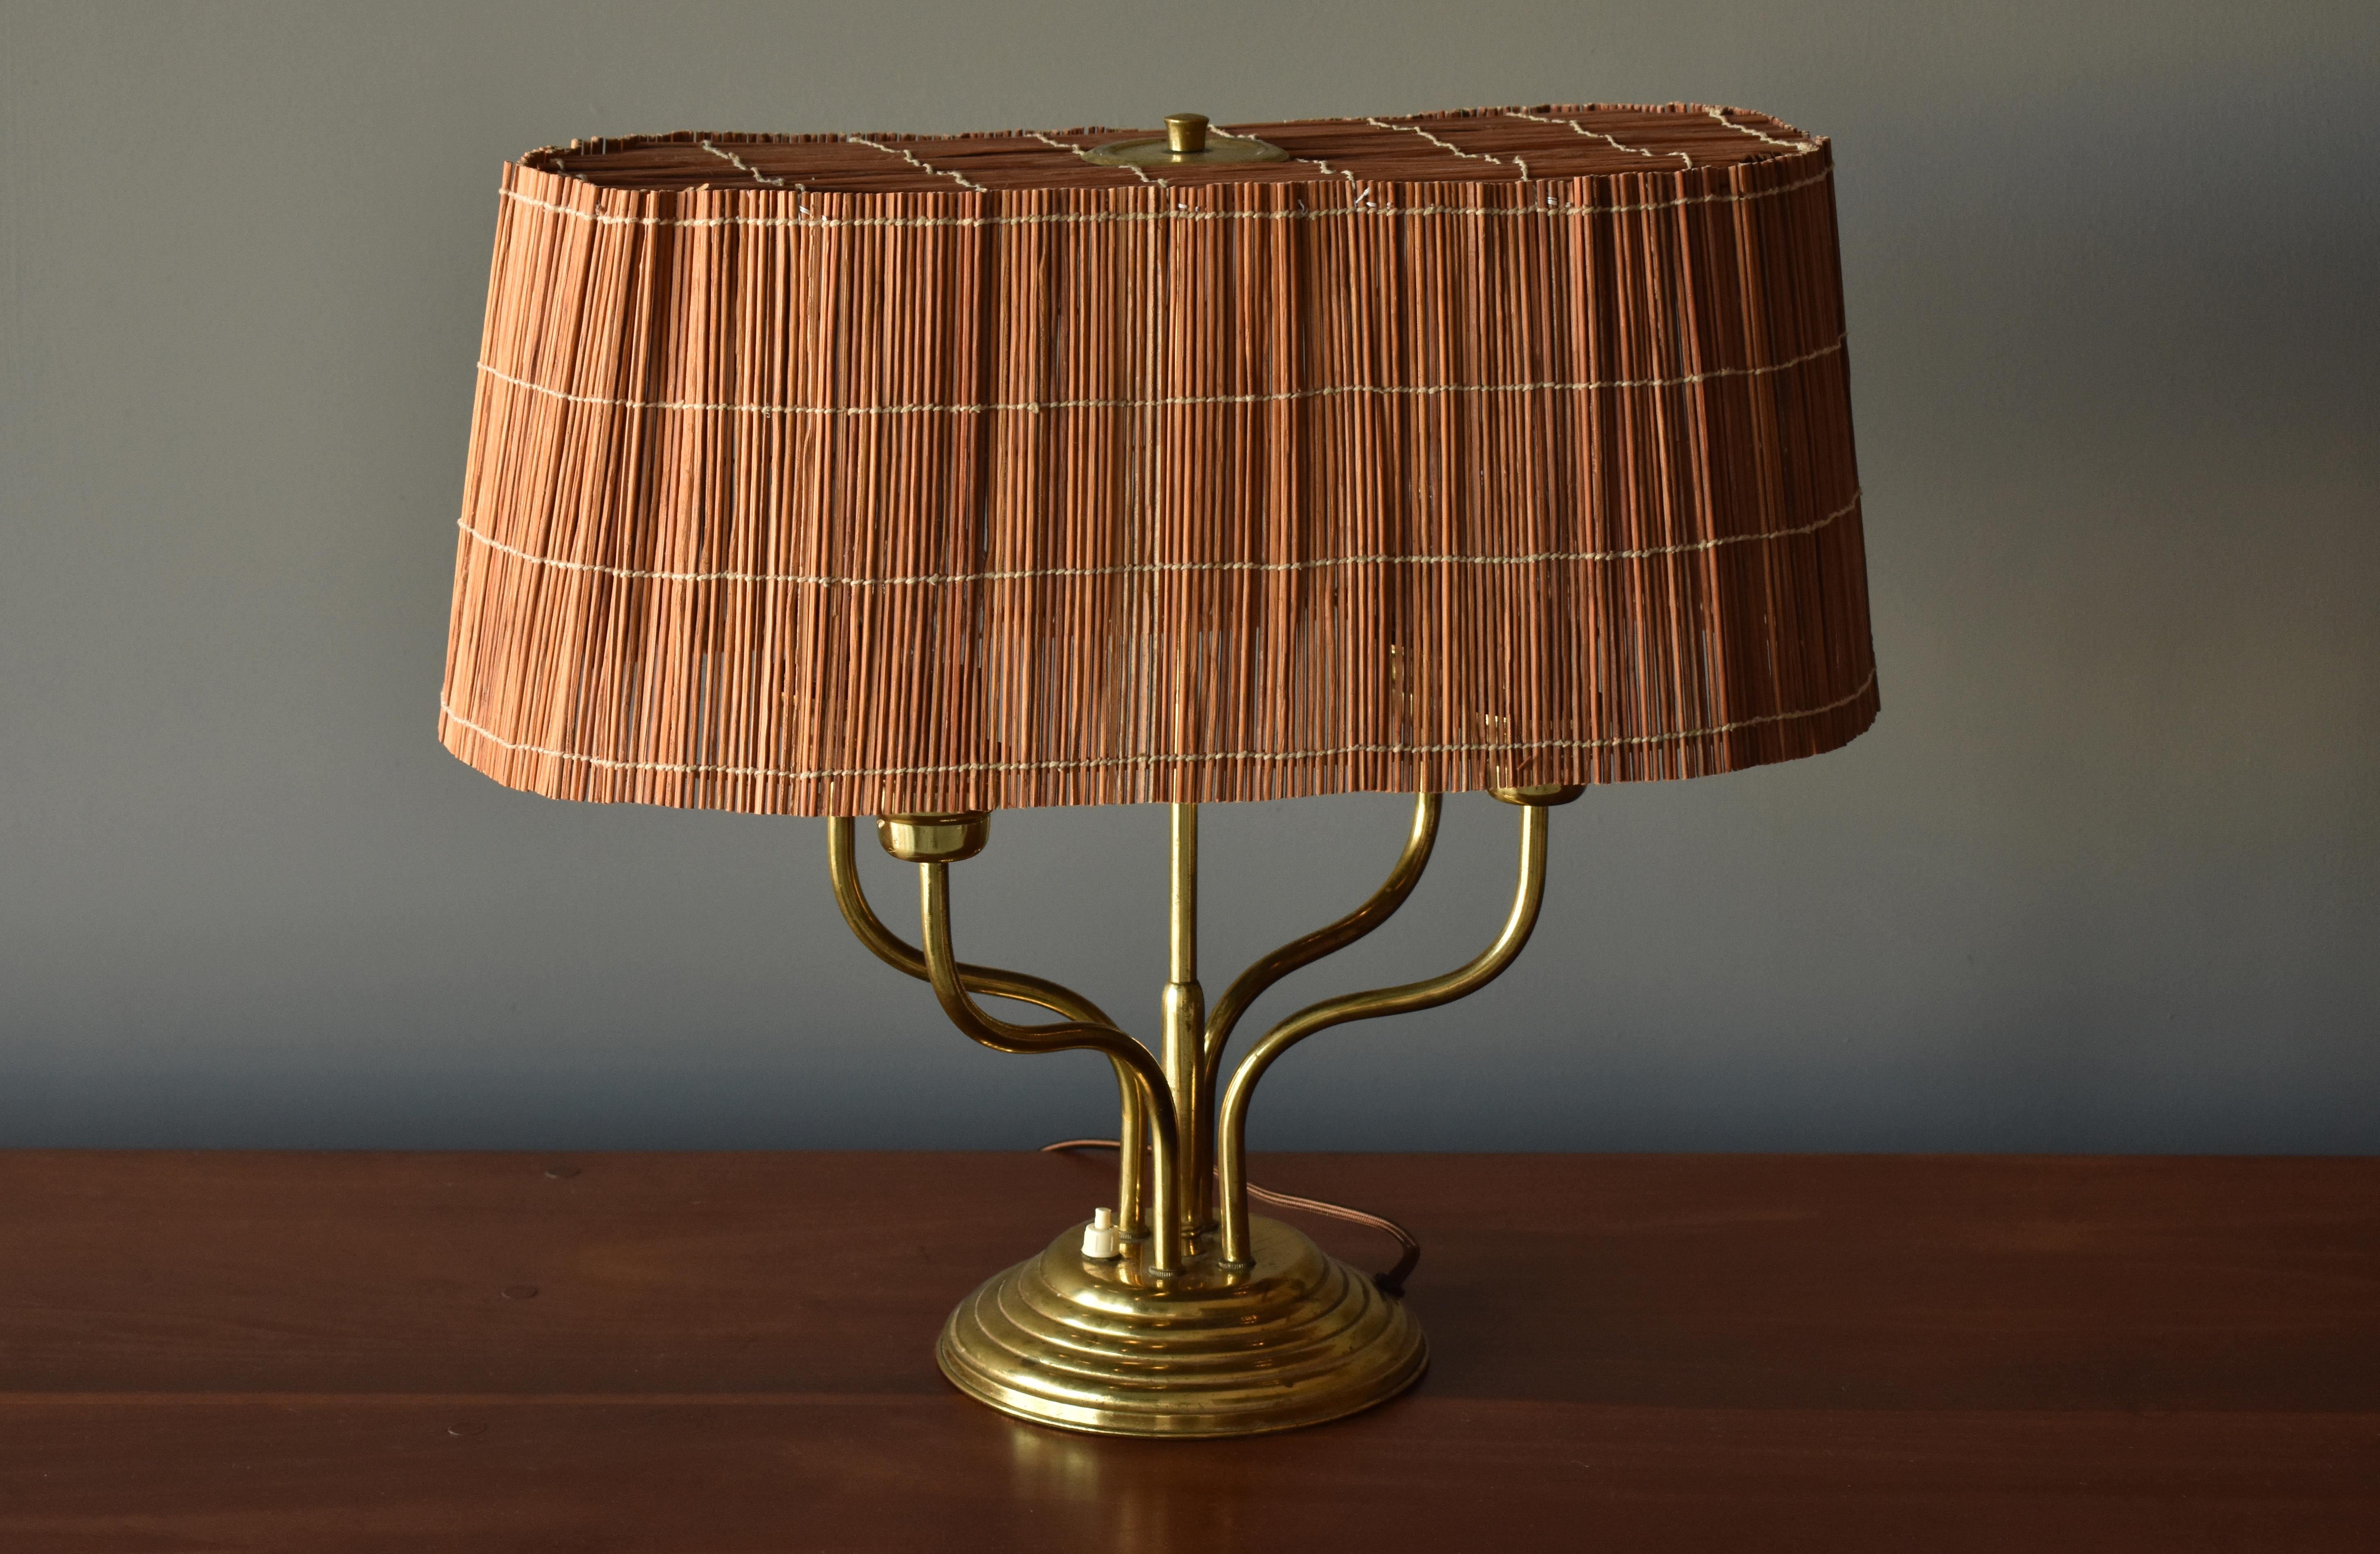 A rare and sizable table lamp by Finnish producer, Itsu. The ornate brass base features four-light sources mounted on organic arms. Warm and diffused light radiates through the large handmade reed screen. 

Model illustrated in manufacturers